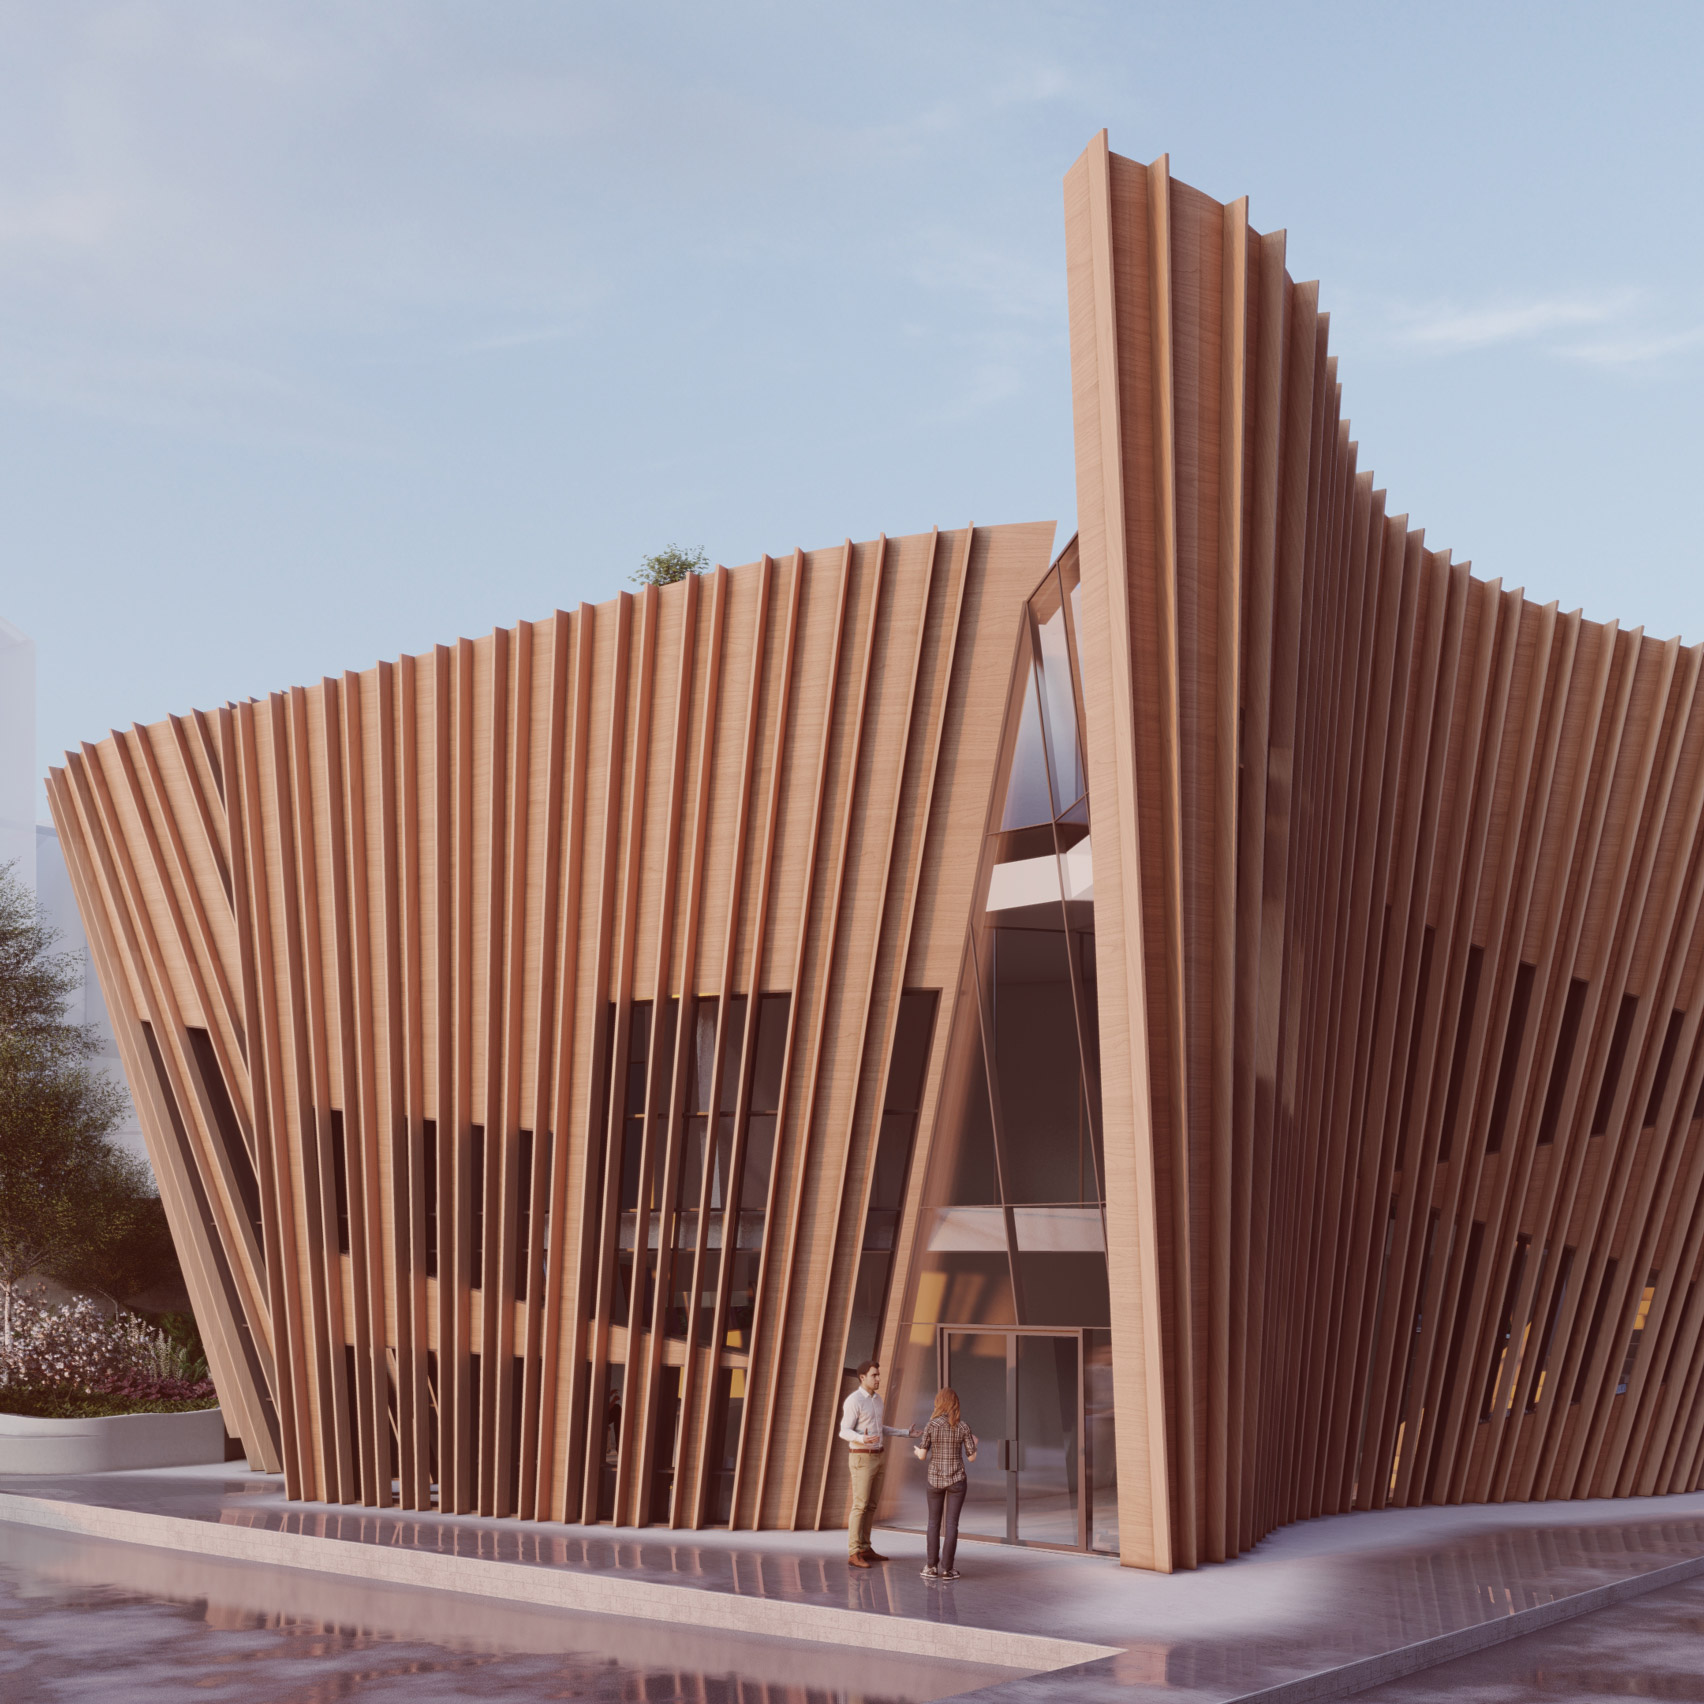 Timber exterior of proposed Maggie's Centre Hampstead by Daniel Libeskind